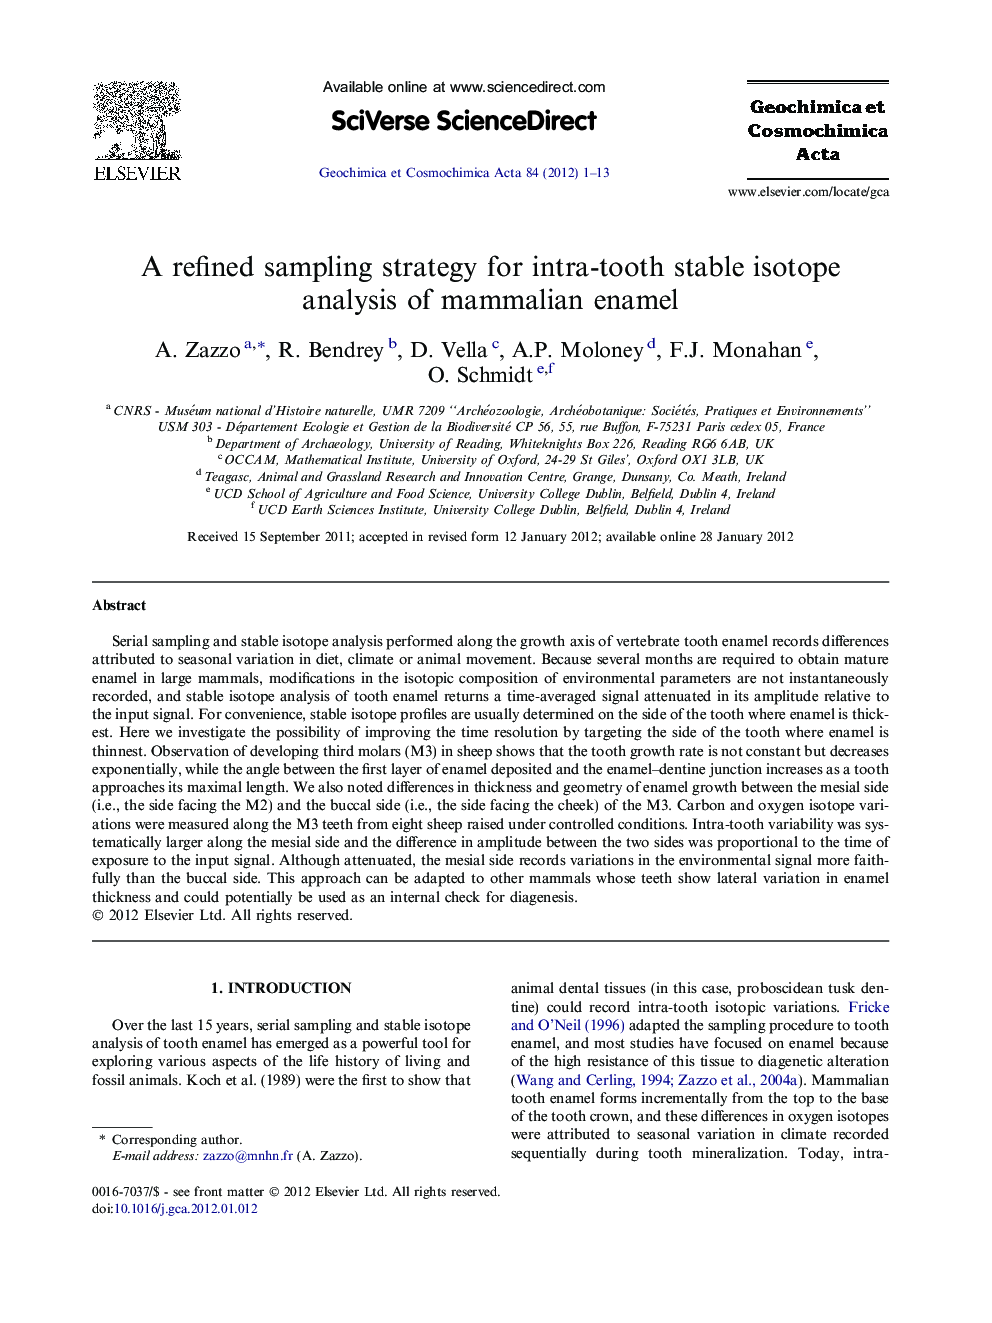 A refined sampling strategy for intra-tooth stable isotope analysis of mammalian enamel